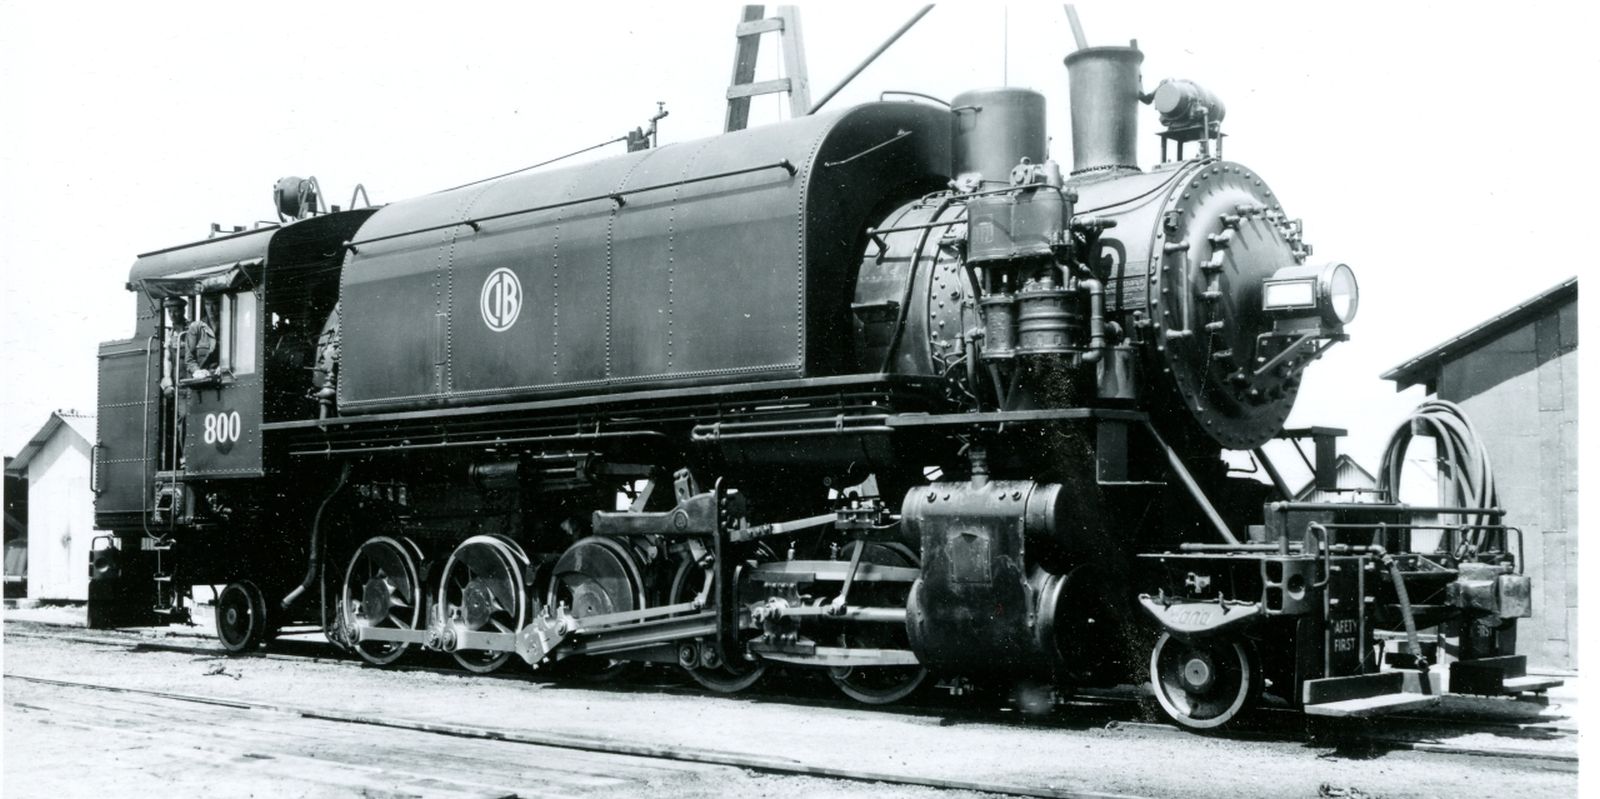 During its time as Consolidated Builders No. 800